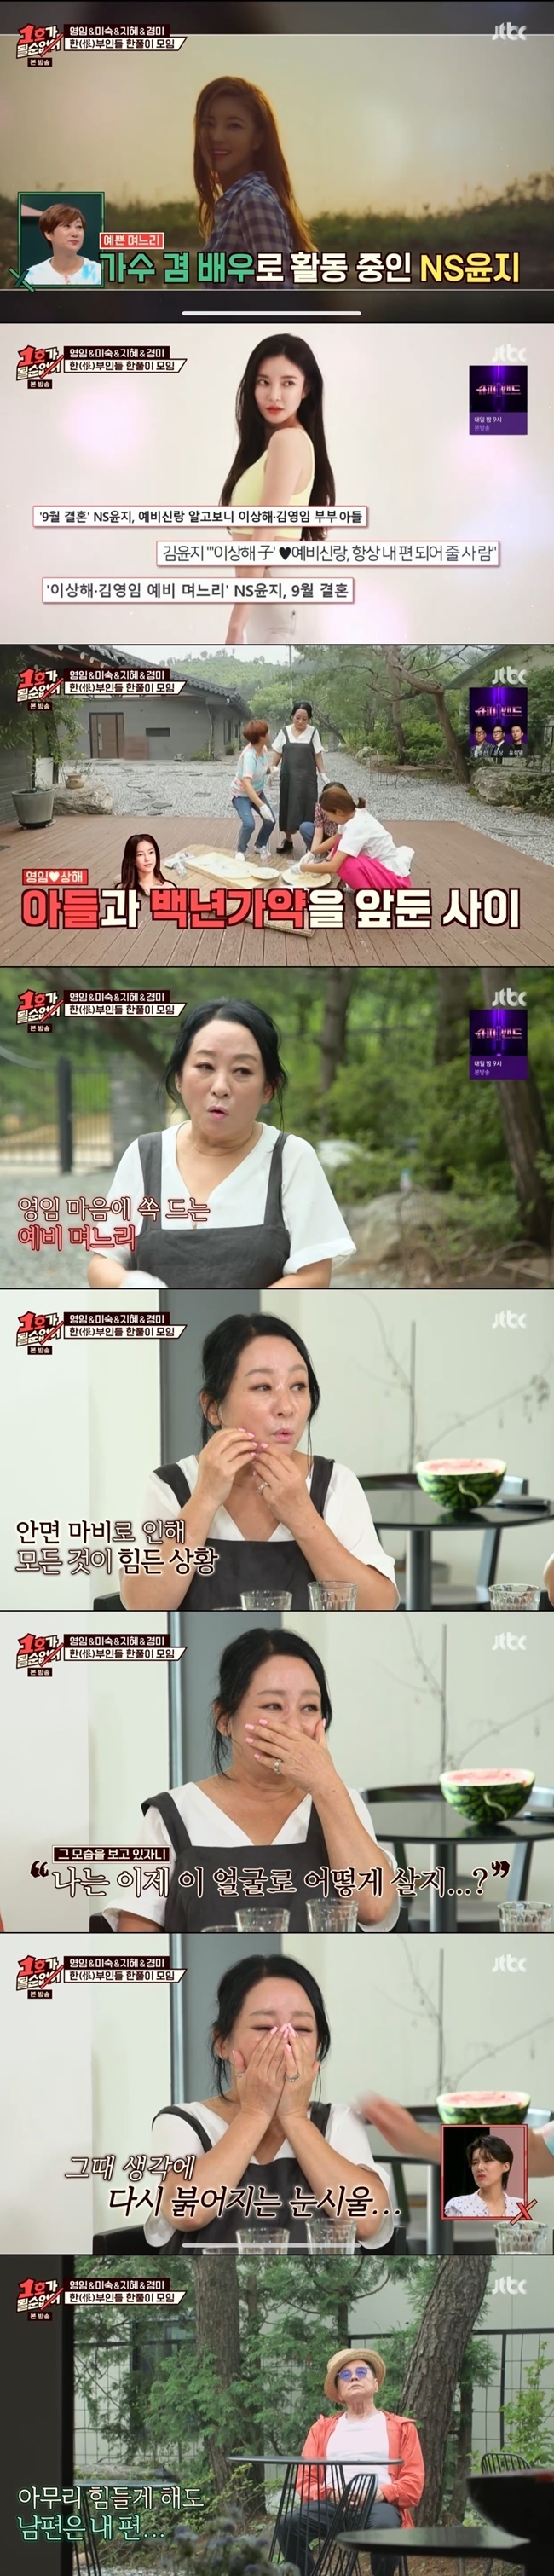 Korean traditional musician Kim Yeong-im has Confessions that he suffered from a Panic disorder because of his husbands strangeness.JTBC Dont Be the First One! (hereinafter referred to as no.1), which was broadcast on August 22, met Im misuk, Kim Ji-hye, Jung Kyung-mi and Kim Young-im to solve the accumulated amount of money to her husband.On the show, Kim Young-im mentioned singer and actor Kim Yoon-ji (NS Yoonji), who is a preliminary Daughter-in-law; Kim Young-im said, (Son) will marry in September.I thought they were just brothers and sisters, but I was not sure they were going to be there.When Im misuk asked if he fits well with Daughter-in-law, Kim Young-im praised him for so close: really spooky, sober and frugal.Kim also expressed his sadness about his husbands strangeness. I have all (weird) what three people (Park Joon-hyung, Kim Hak-rae, and Yoon Hyung-bin) did.My colleagues and juniors are coming to my house 20-30 people. I called at 2 am and baked ribs. I did my best. I was stressed and Panic disorder came. I went 48kg and it was 40kg. I put food and I felt like sand.Tears were pouring and facial paralysis. I went to the hospital in the evening because it was hard, and it was getting worse because it was going on.I was going to ride with a scarf and the women carried their bags and cremated and passed by. I wanted to do it. If a person makes you too hard, it seems to come to you. After decades of age, there is no one like him.My sisters will have a good day if they live a little longer. 